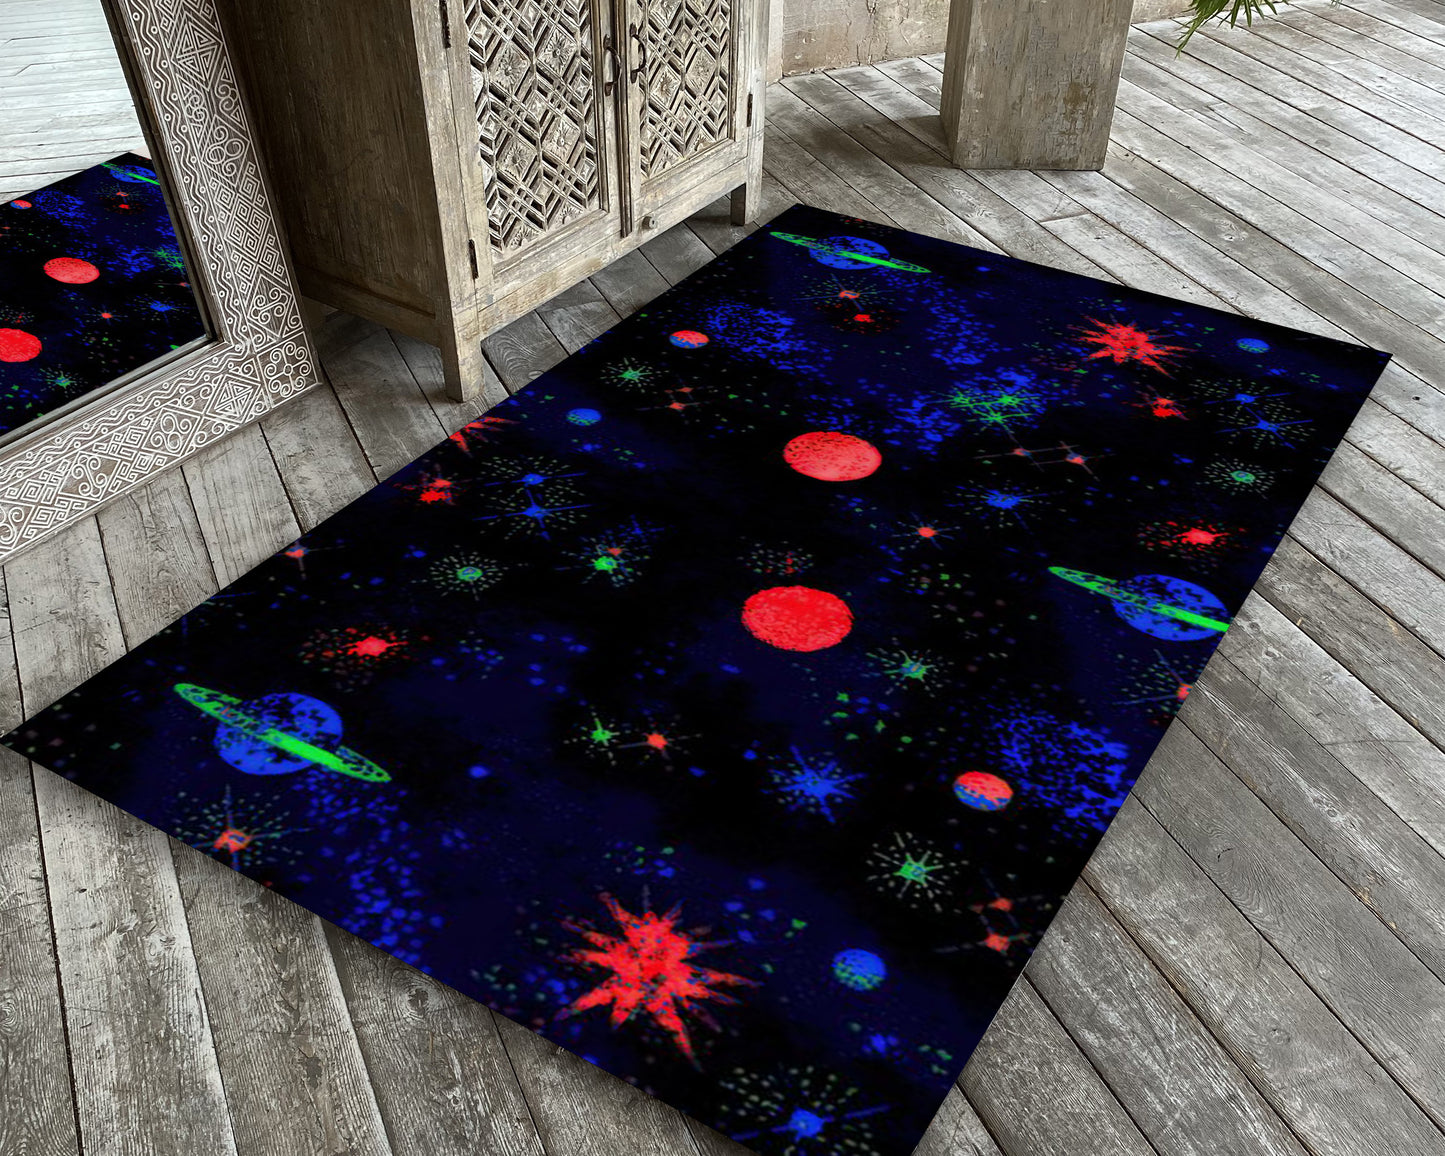 Classic Bowling Arcade Rug, 90s Retro Style Game Carpet, Space Gaming Mat, Game Room Decor